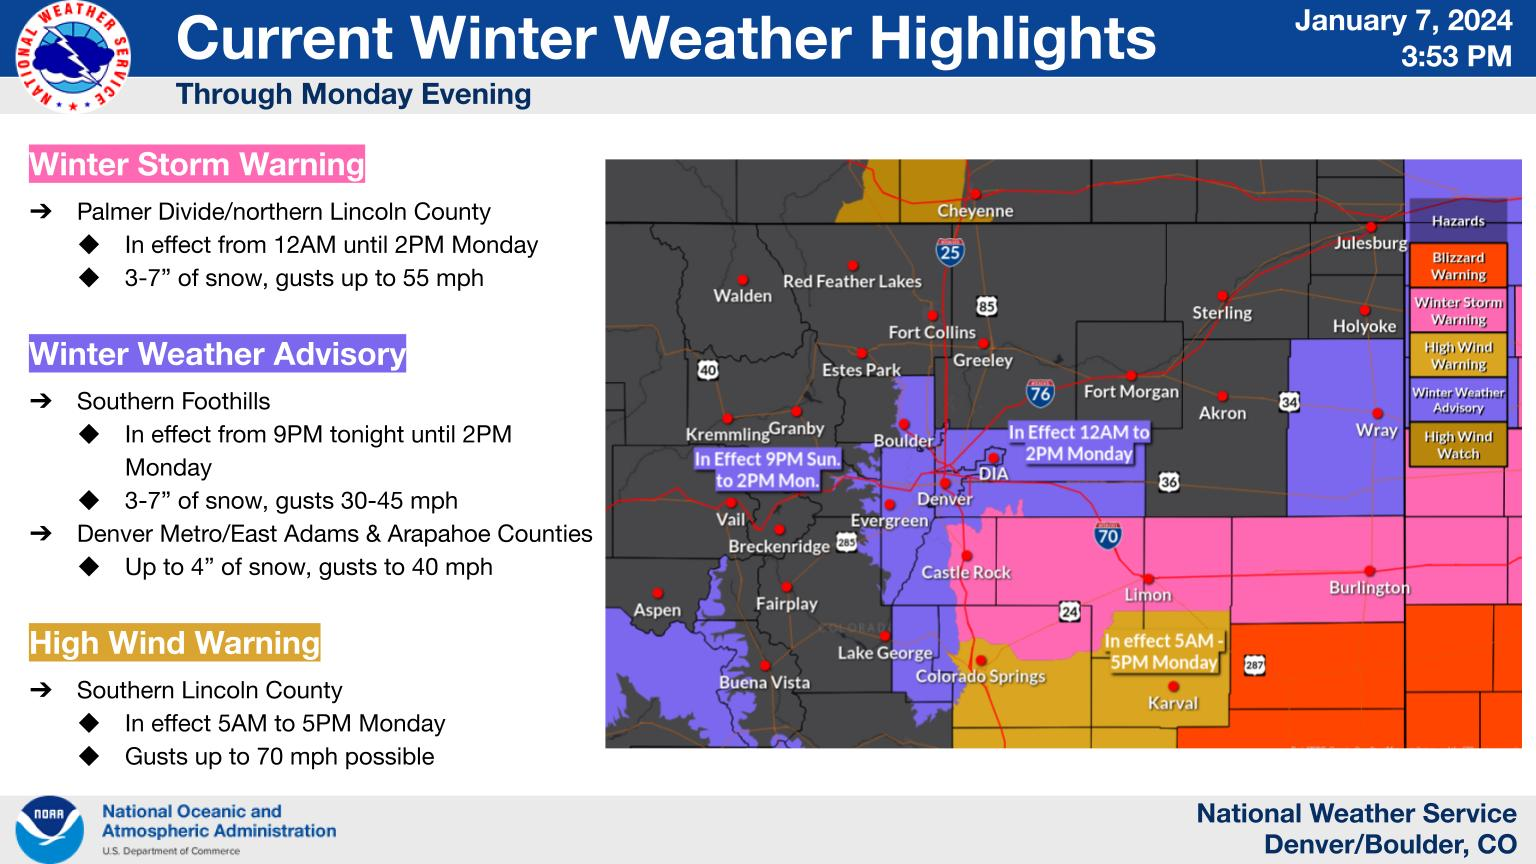 Winter Weather Highlights map for Jan. 7 and 8.png detail image